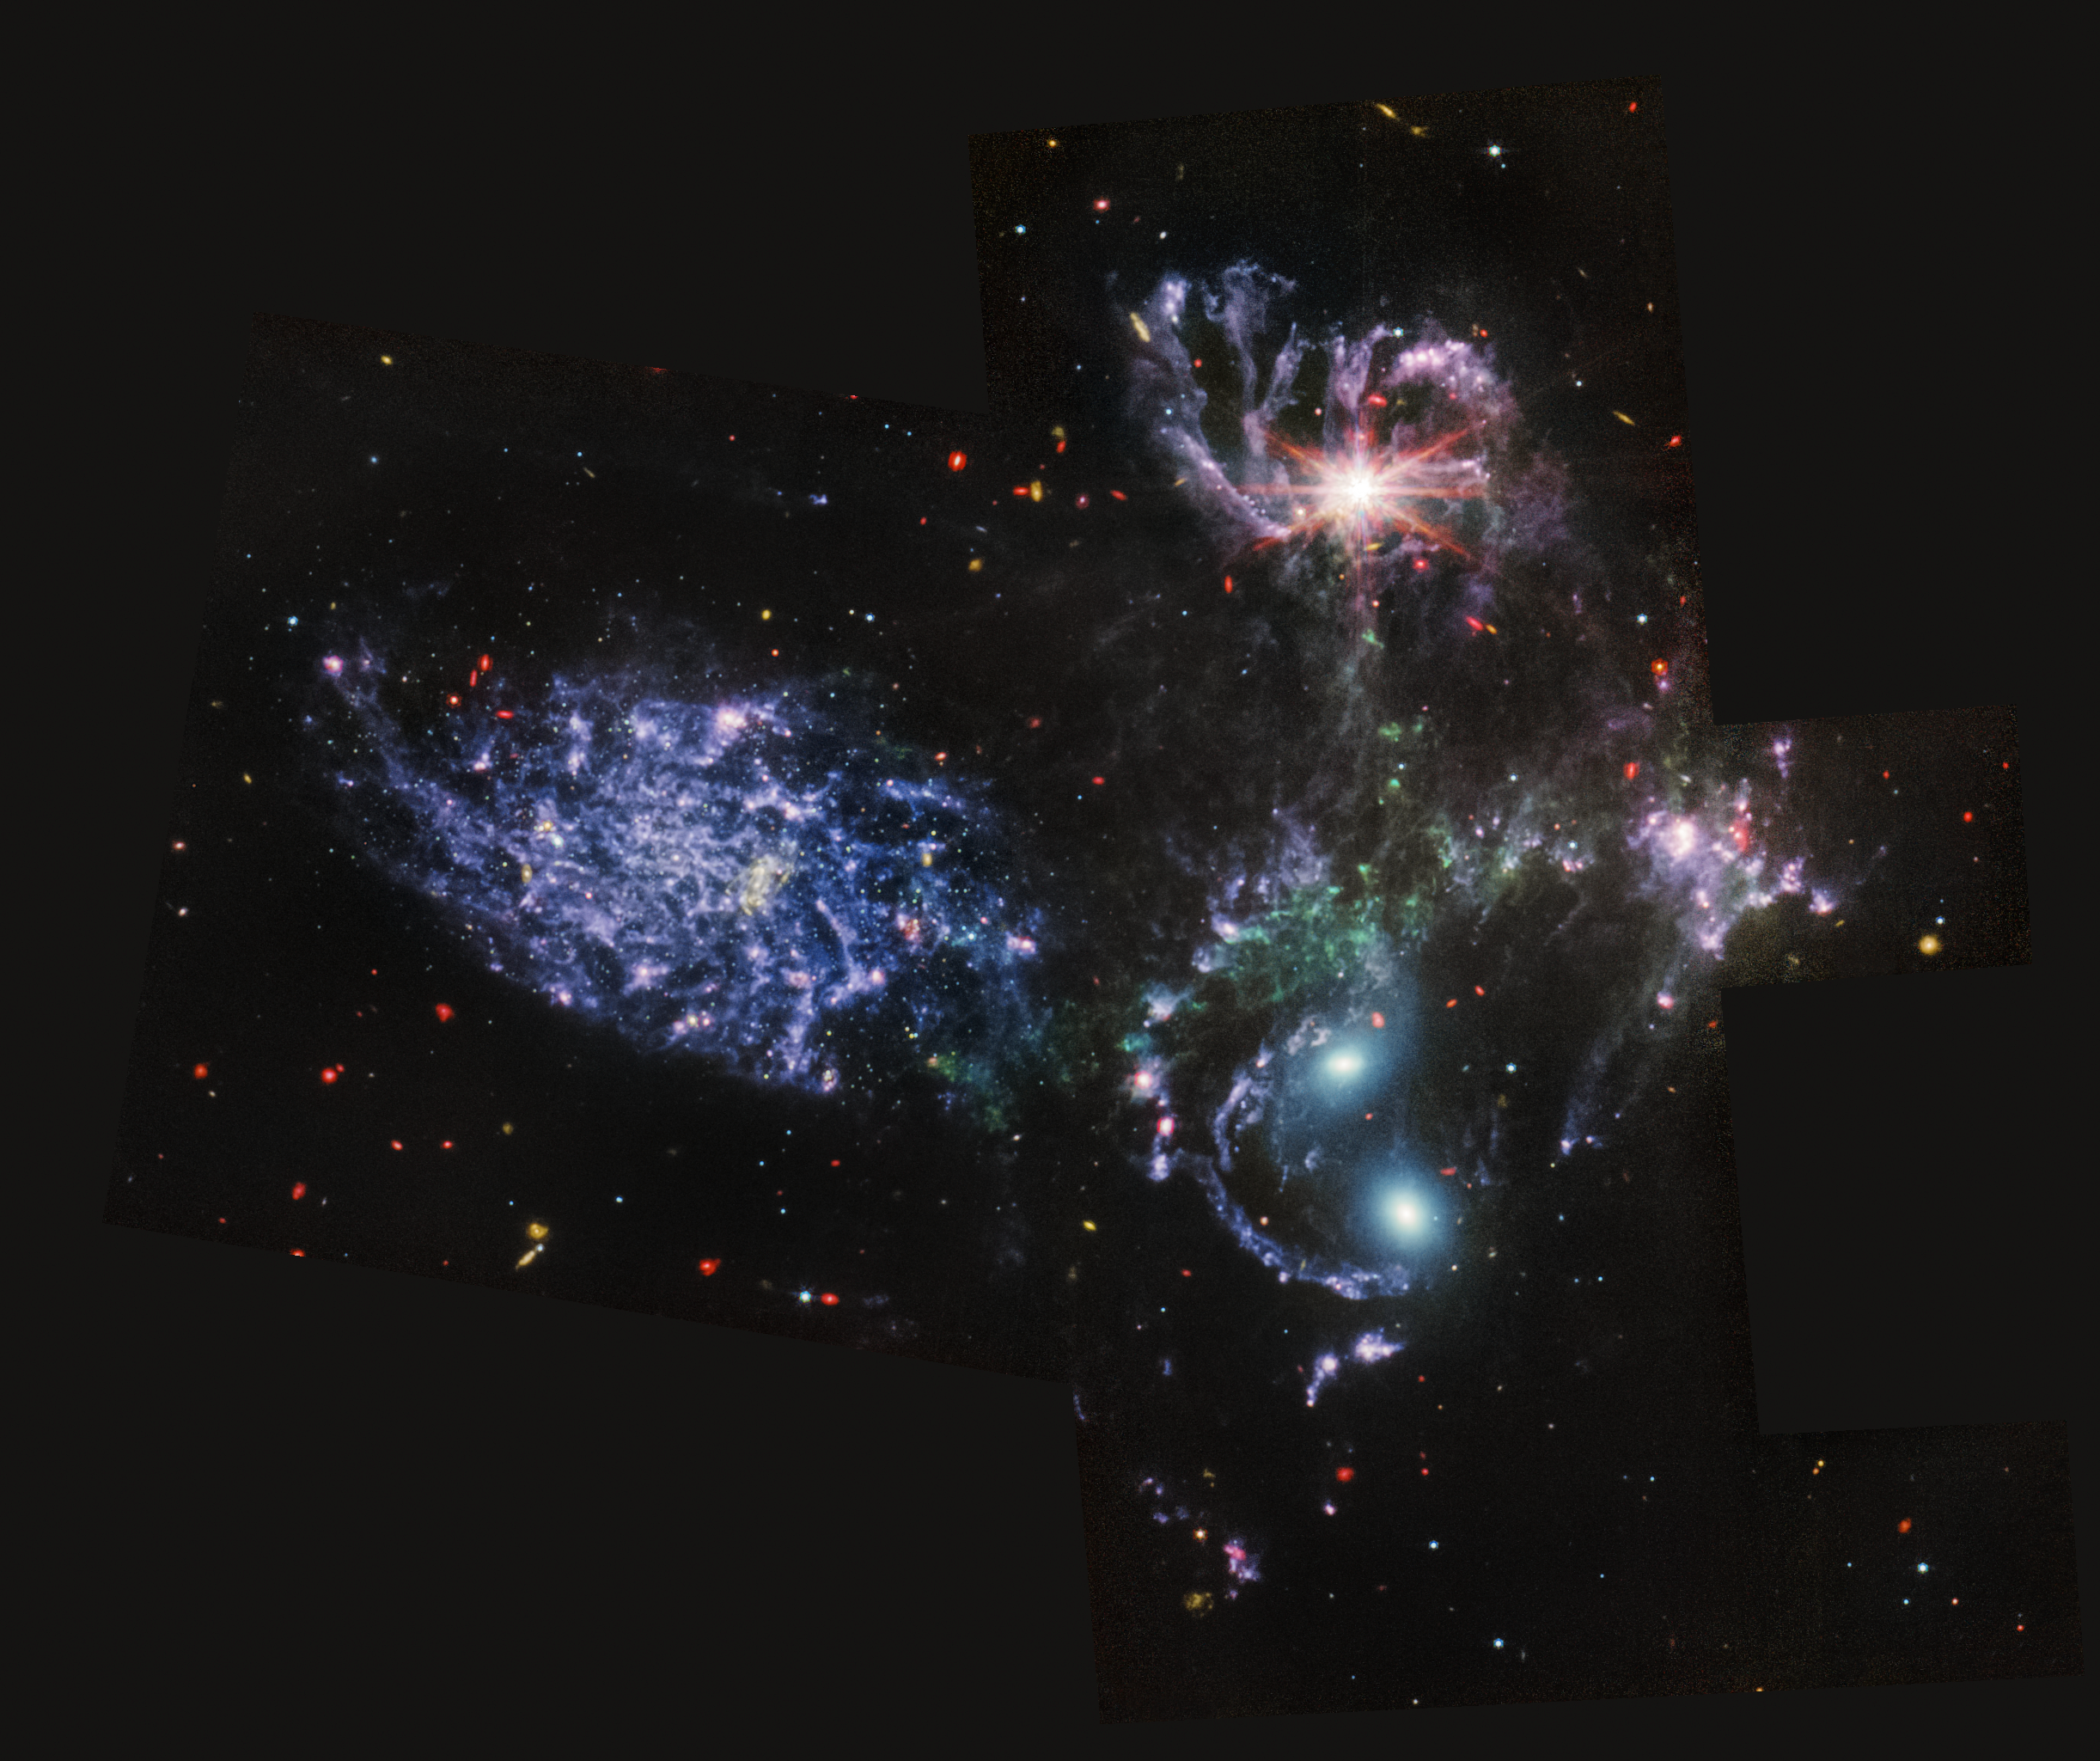 Image of a group of four galaxies that appear close to each other in the sky: two in the middle, one toward the top, one to the upper left. In addition, there is a large bright patch toward the right. The galaxy at the top has a bright reddish core and is surrounded by swirls of blue and purple filaments that travel inward to its bright core, also highlighted by eight diffraction spikes. The galaxy on the left is a mass of purple gas surrounding a dim red core. The mass is made from small clumps, each slightly illuminated. The two galaxies in the middle have two bright, blue cores, surrounded by purple wisps. The bright patch to the right is made from clouds of blue and purple, strung together in filament-like bands. Surrounding the galaxies is a background peppered with red, blue, and purple dots, which are distant stars and galaxies.